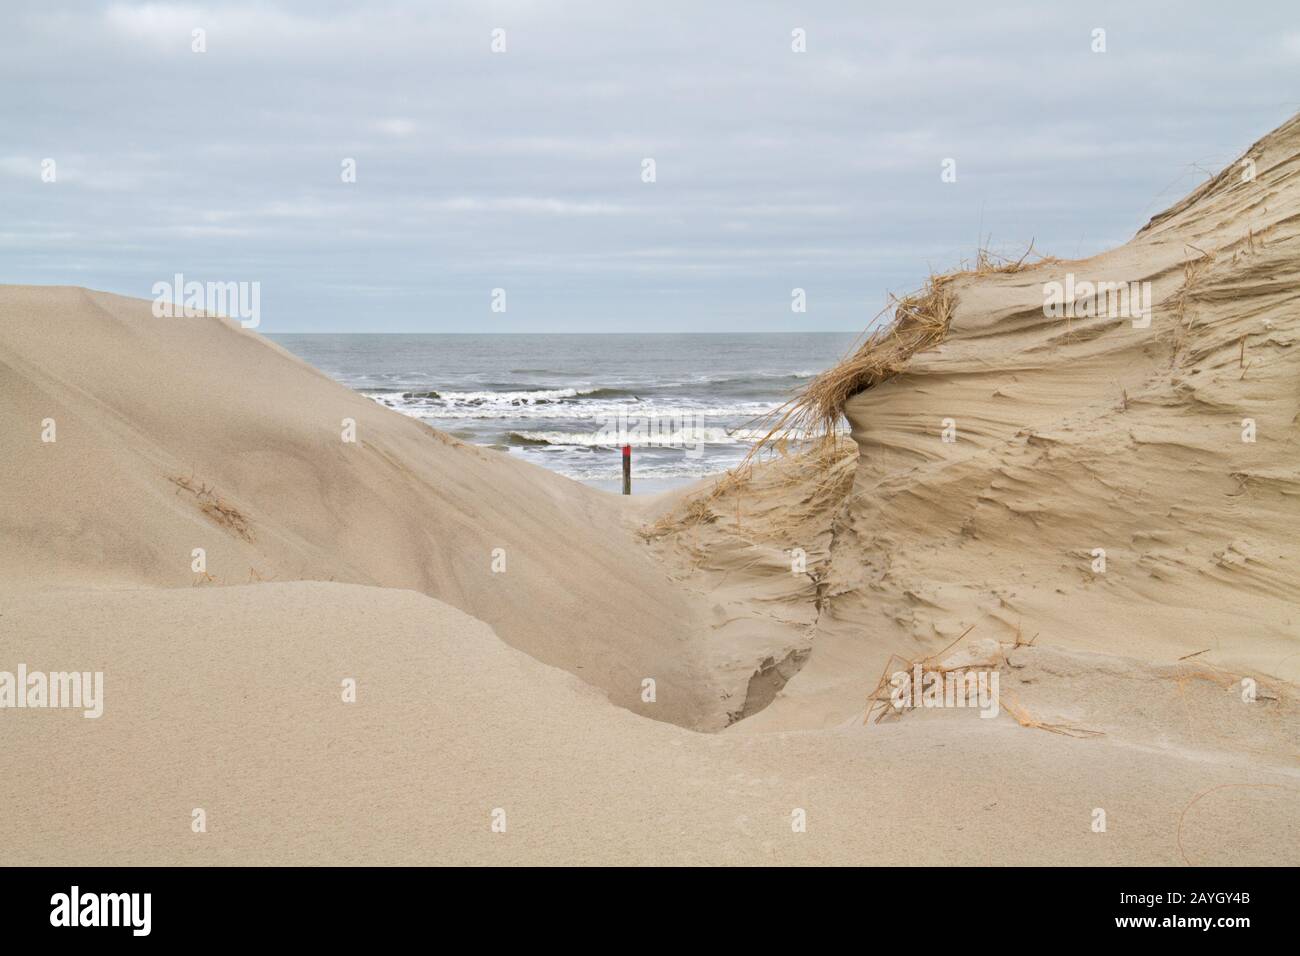 View on beach with a beach pole and the North sea between two dunes Stock Photo